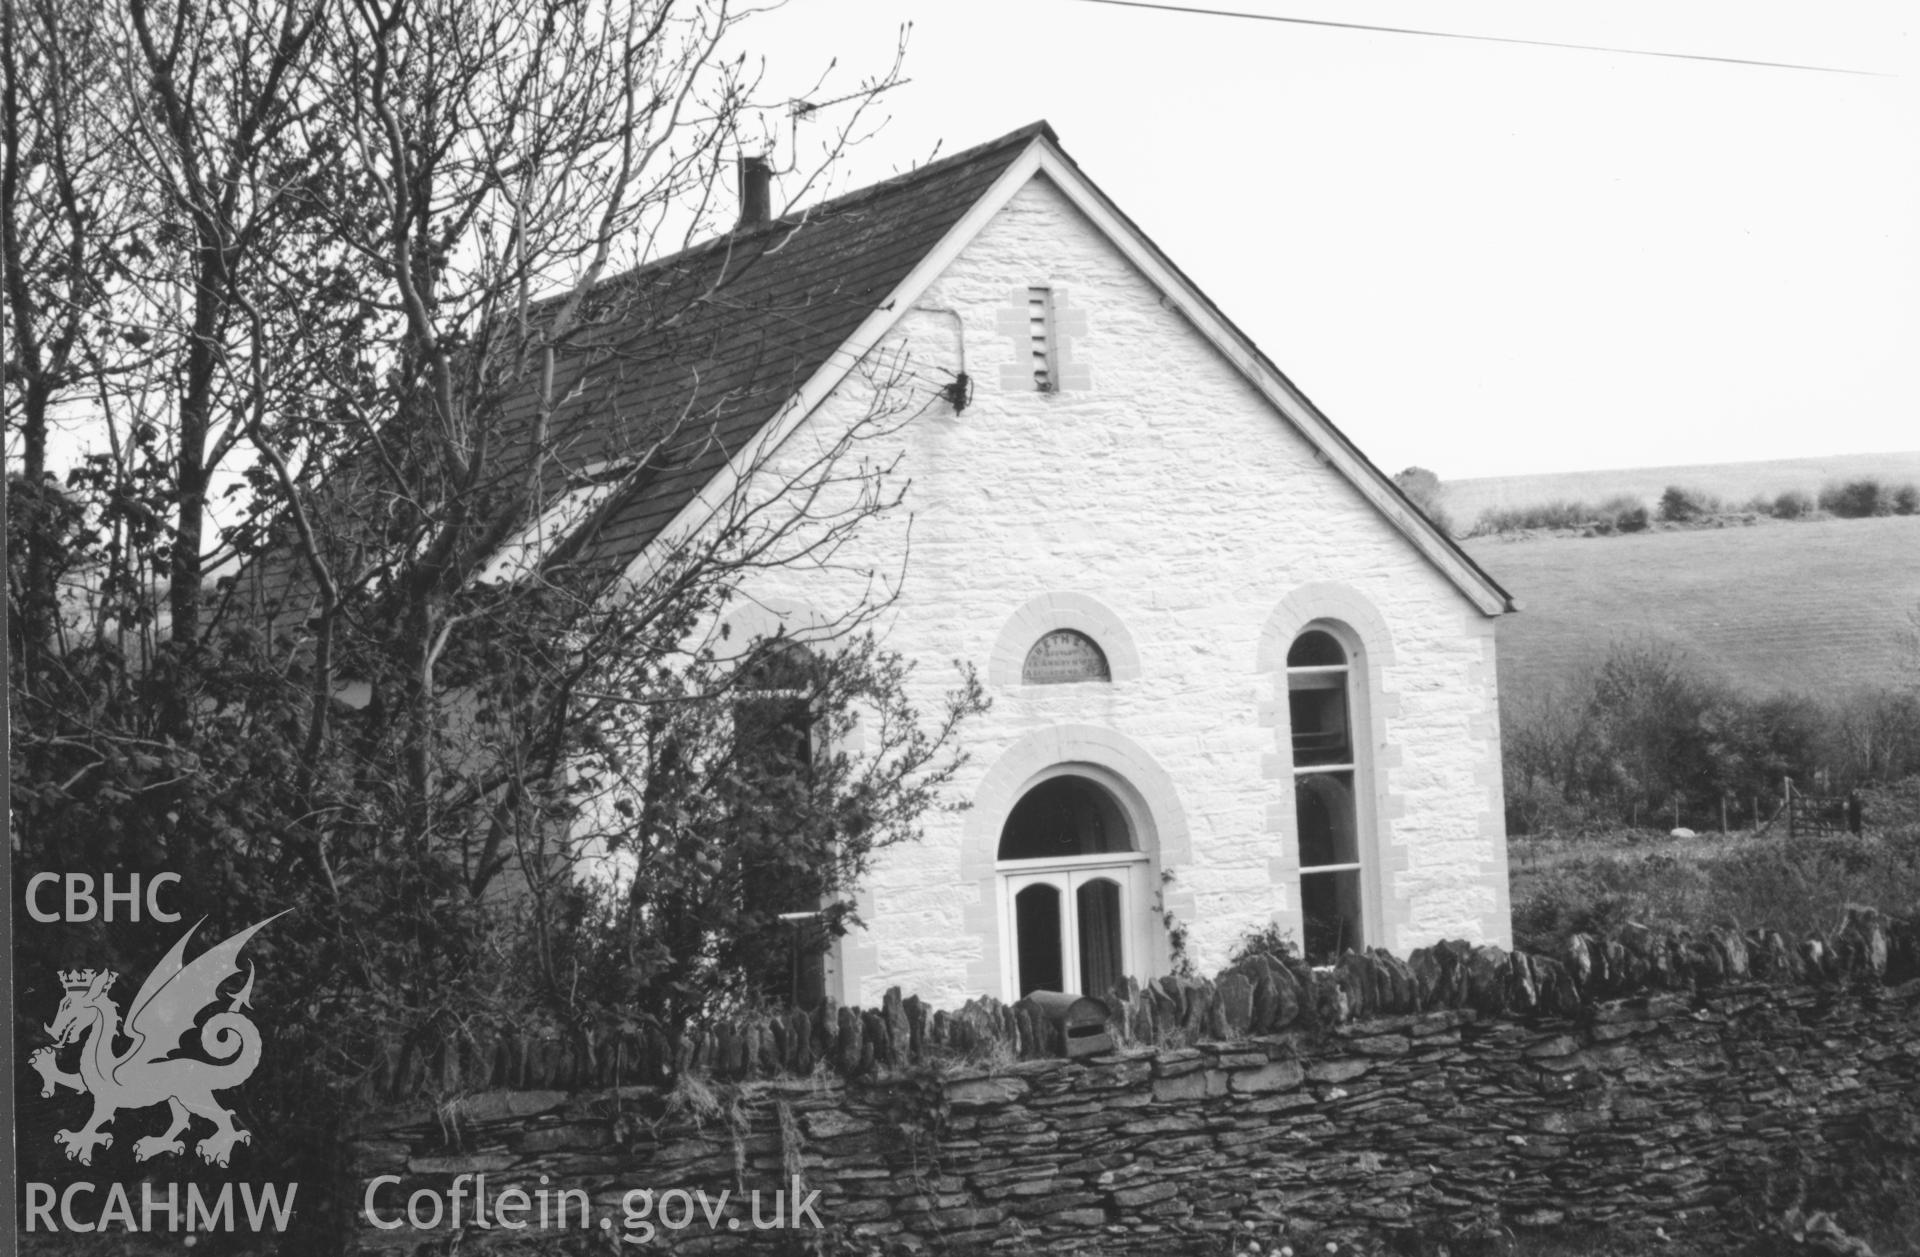 Digital copy of a black and white photograph showing a general view of Bethel Independent Sunday School, Llanbeddau, taken by Robert Scourfield, c.1996.